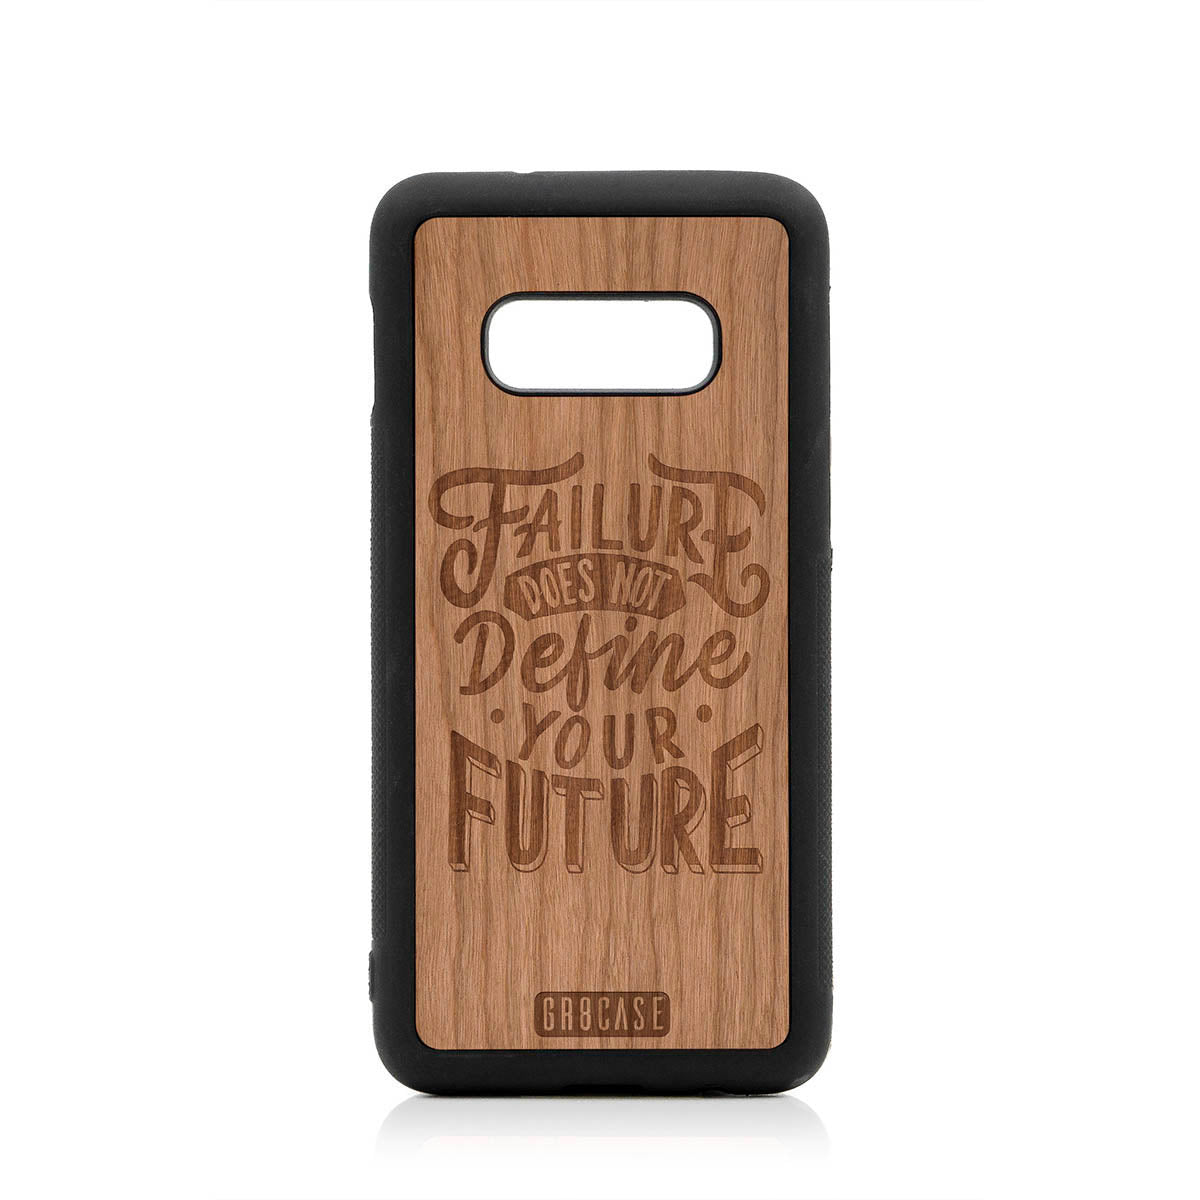 Failure Does Not Define You Future Design Wood Case For Samsung Galaxy S10E by GR8CASE